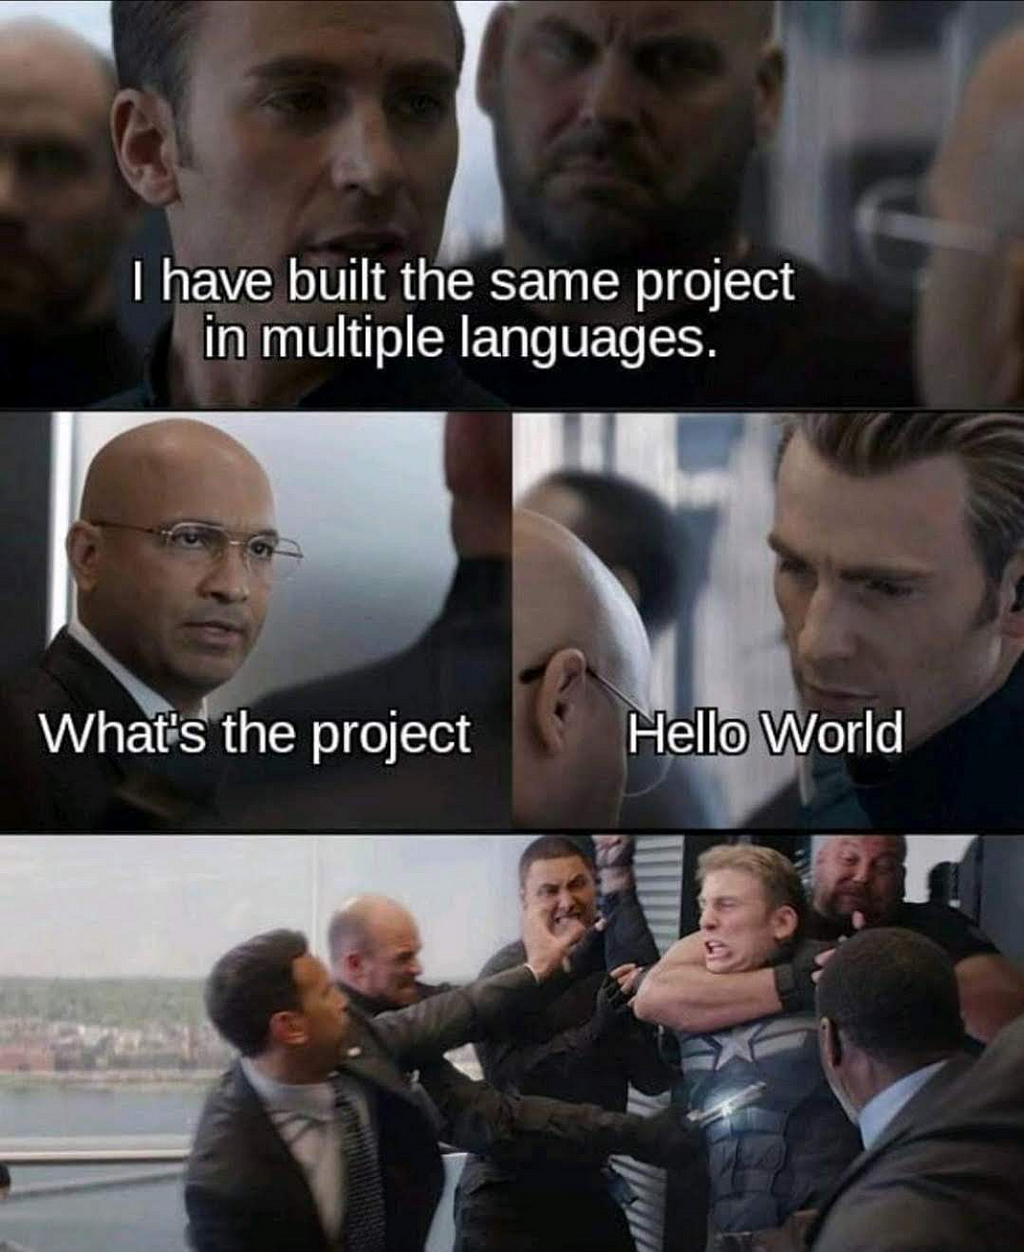 A meme that mocks people that claim to implement the same project across languages but it’s only Hello World